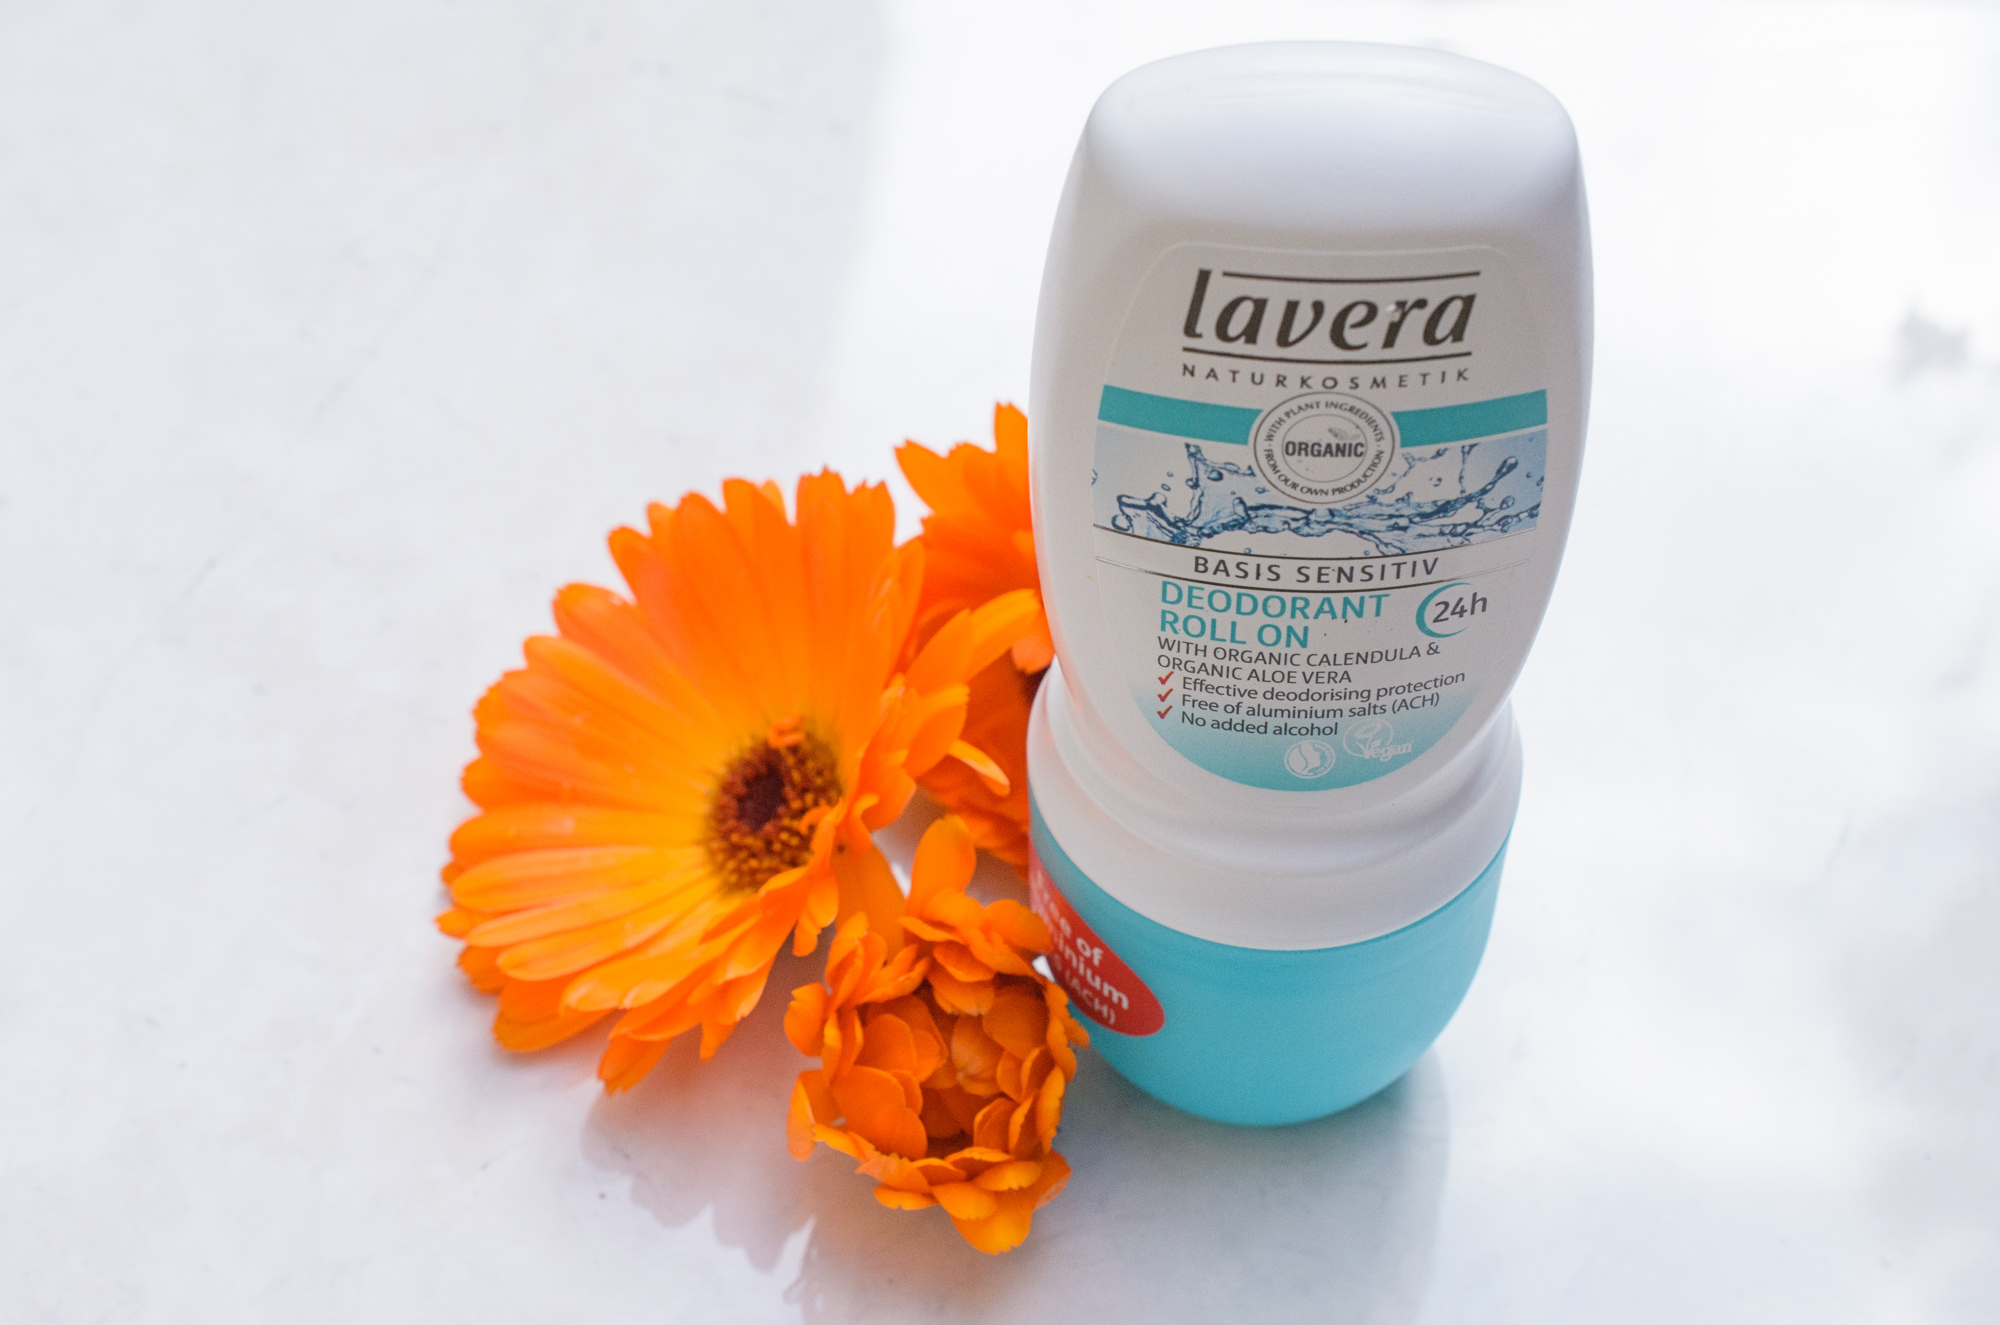 Review of Lavera Basis Sensitiv Roll On Deodorant, an effective aluminium free deodorant with skin loving ingredients.